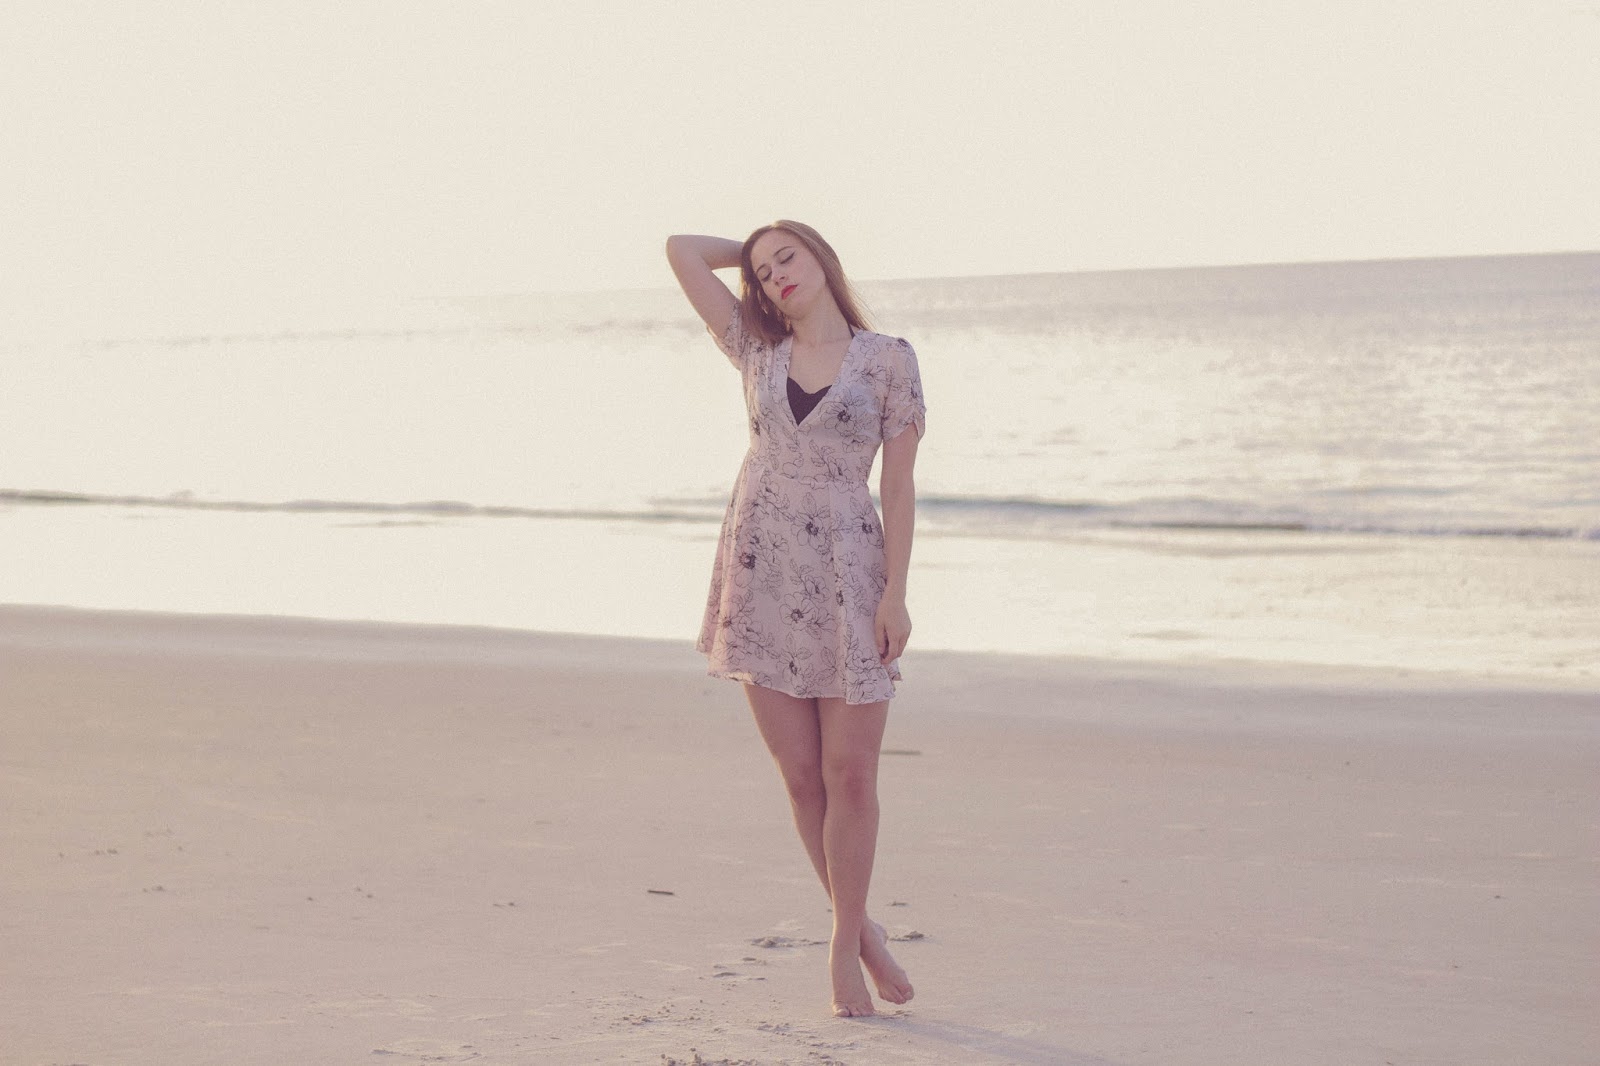 vintage, beach outfit, romantic outfit, retro, style, vintage beach style, high wasted bathing suit, chiffon floral dress , forever 21, the awakening, kate chopin, personal style blogger, movie blogger, film, summer style, taylor swift style, girly, beach photography, outfit